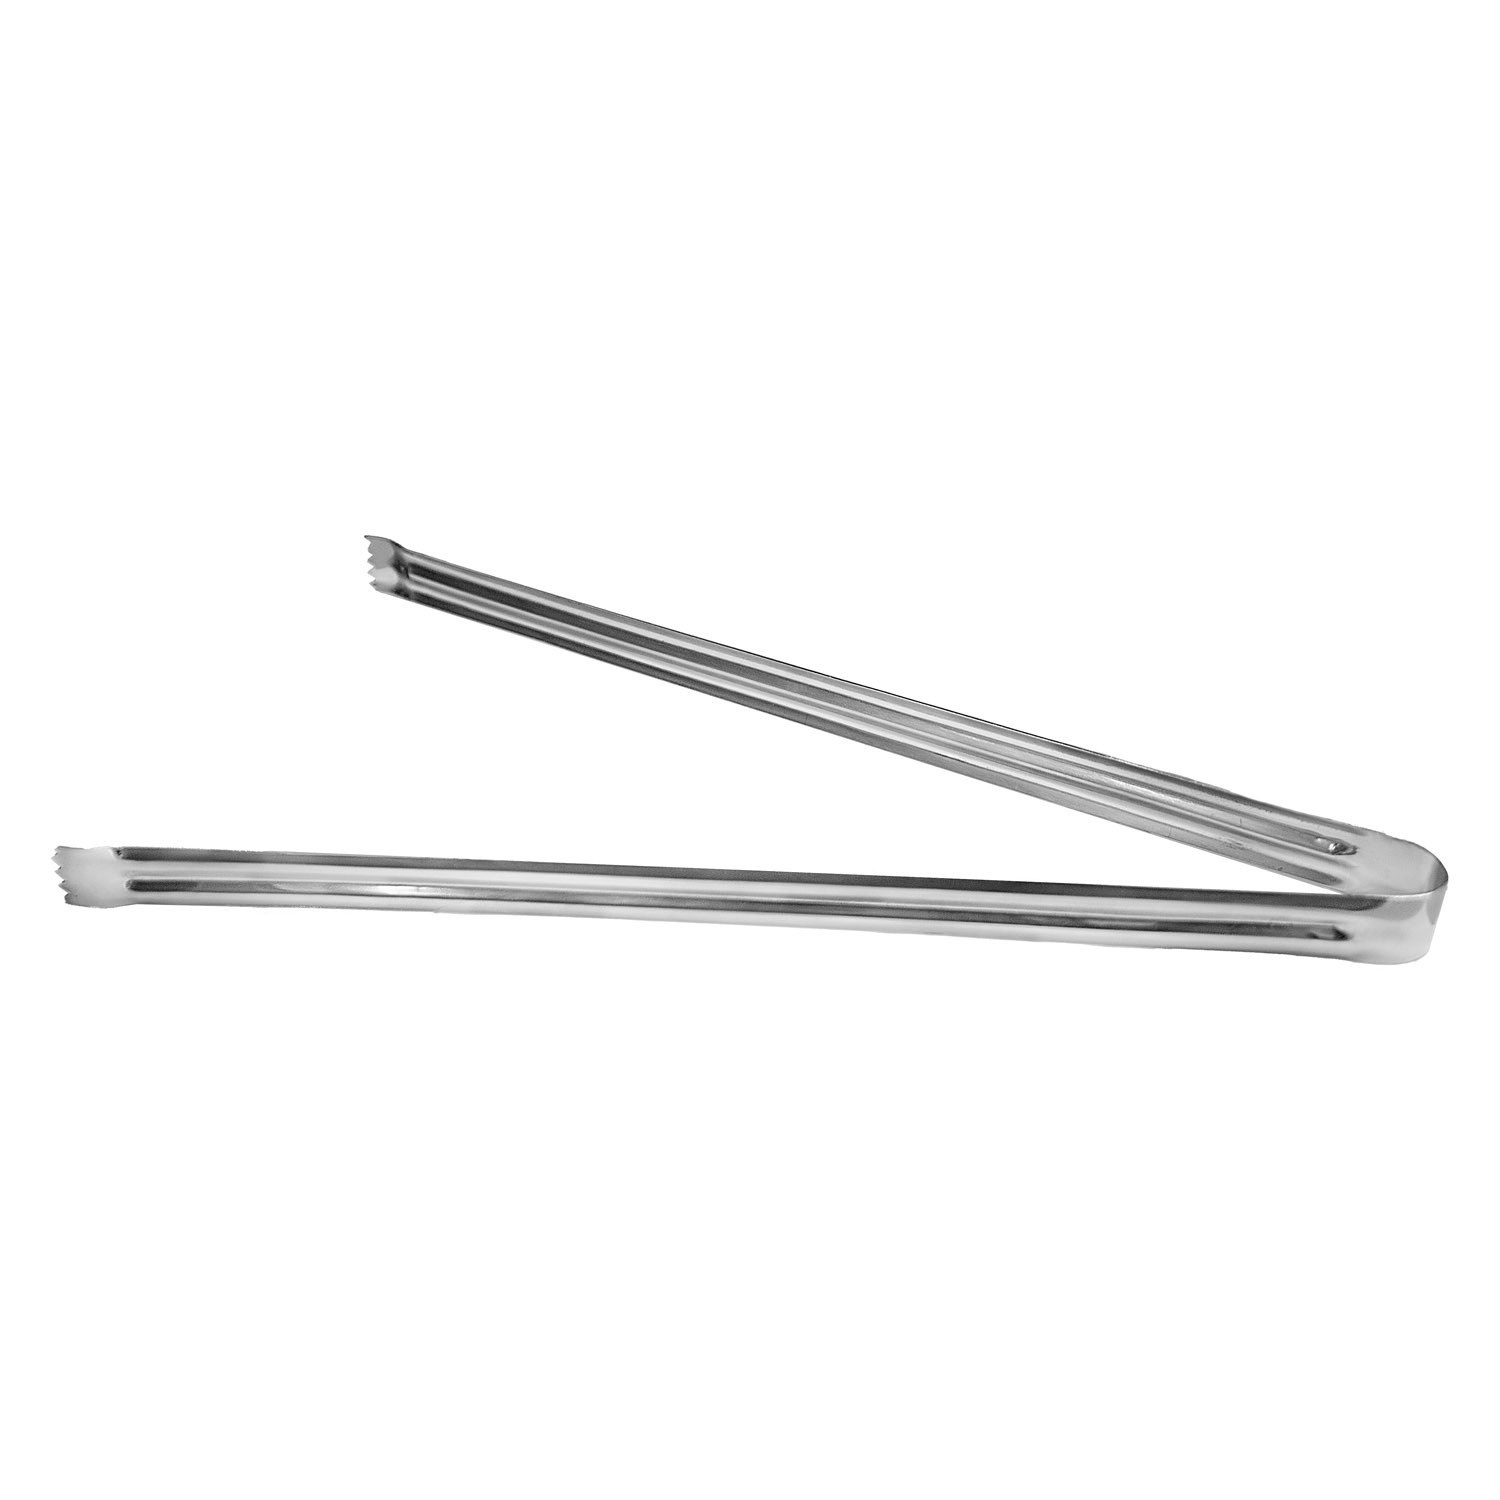 CAC China SPMT-12 Stainless Steel Pom Tongs 12"